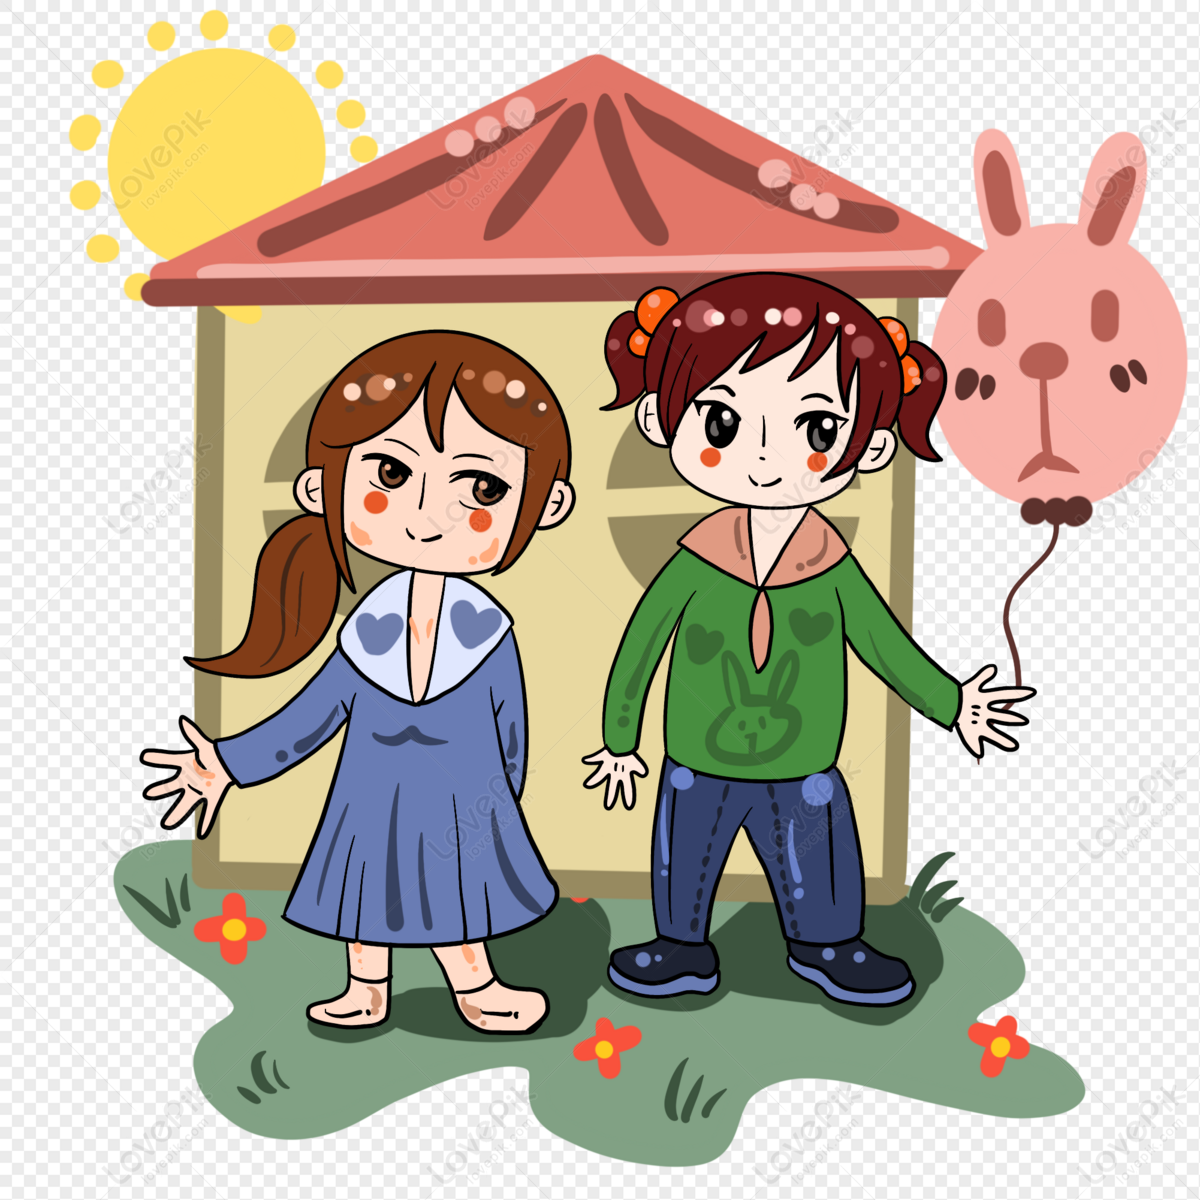 Good Friend PNG Image And Clipart Image For Free Download - Lovepik |  401248208